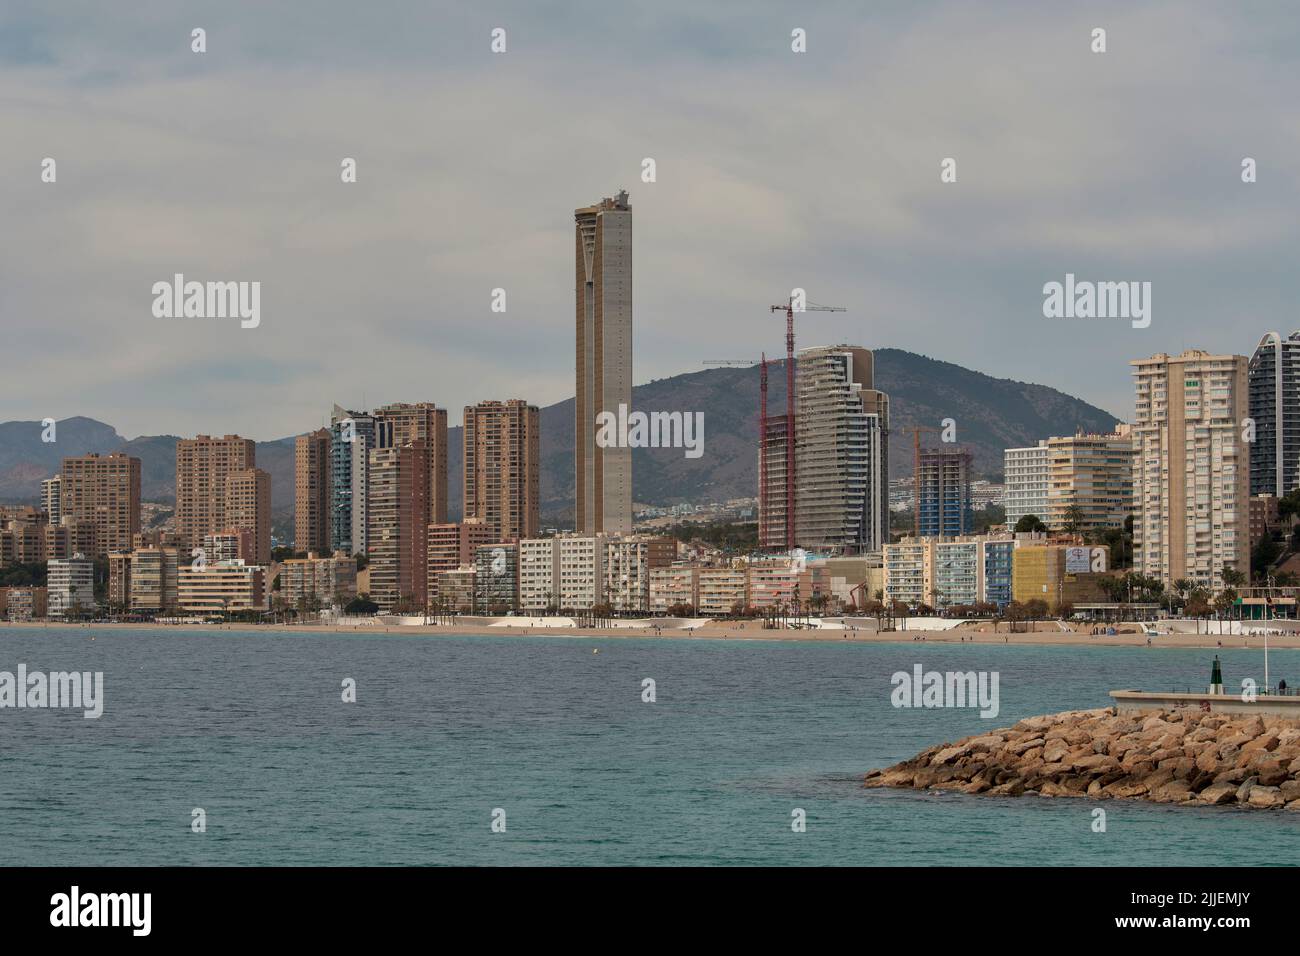 Panoramic view of Playa Poniente from the fishing port in the city of Benidorm, Alicante province, Valencian Community, Spain, Europe Stock Photo